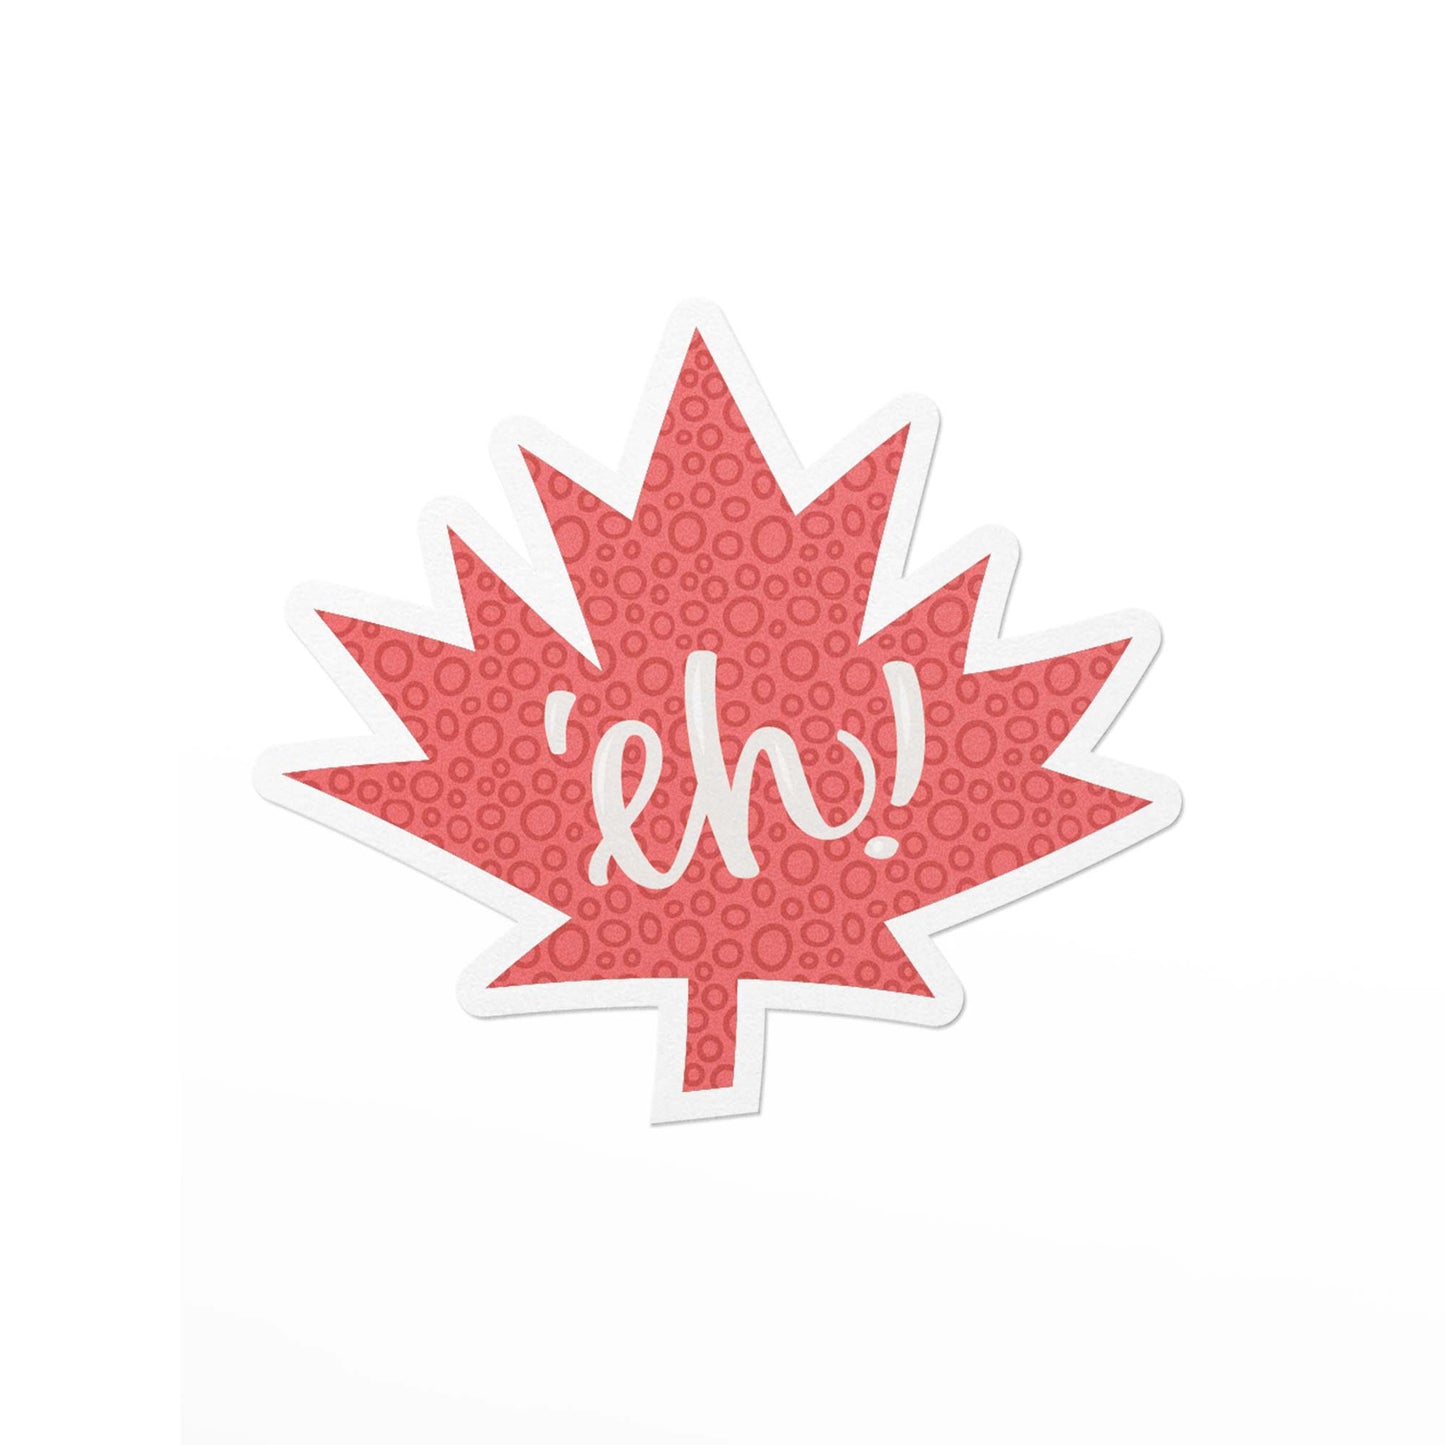 Maple leaf vinyl sticker with the canadian slang, 'eh.